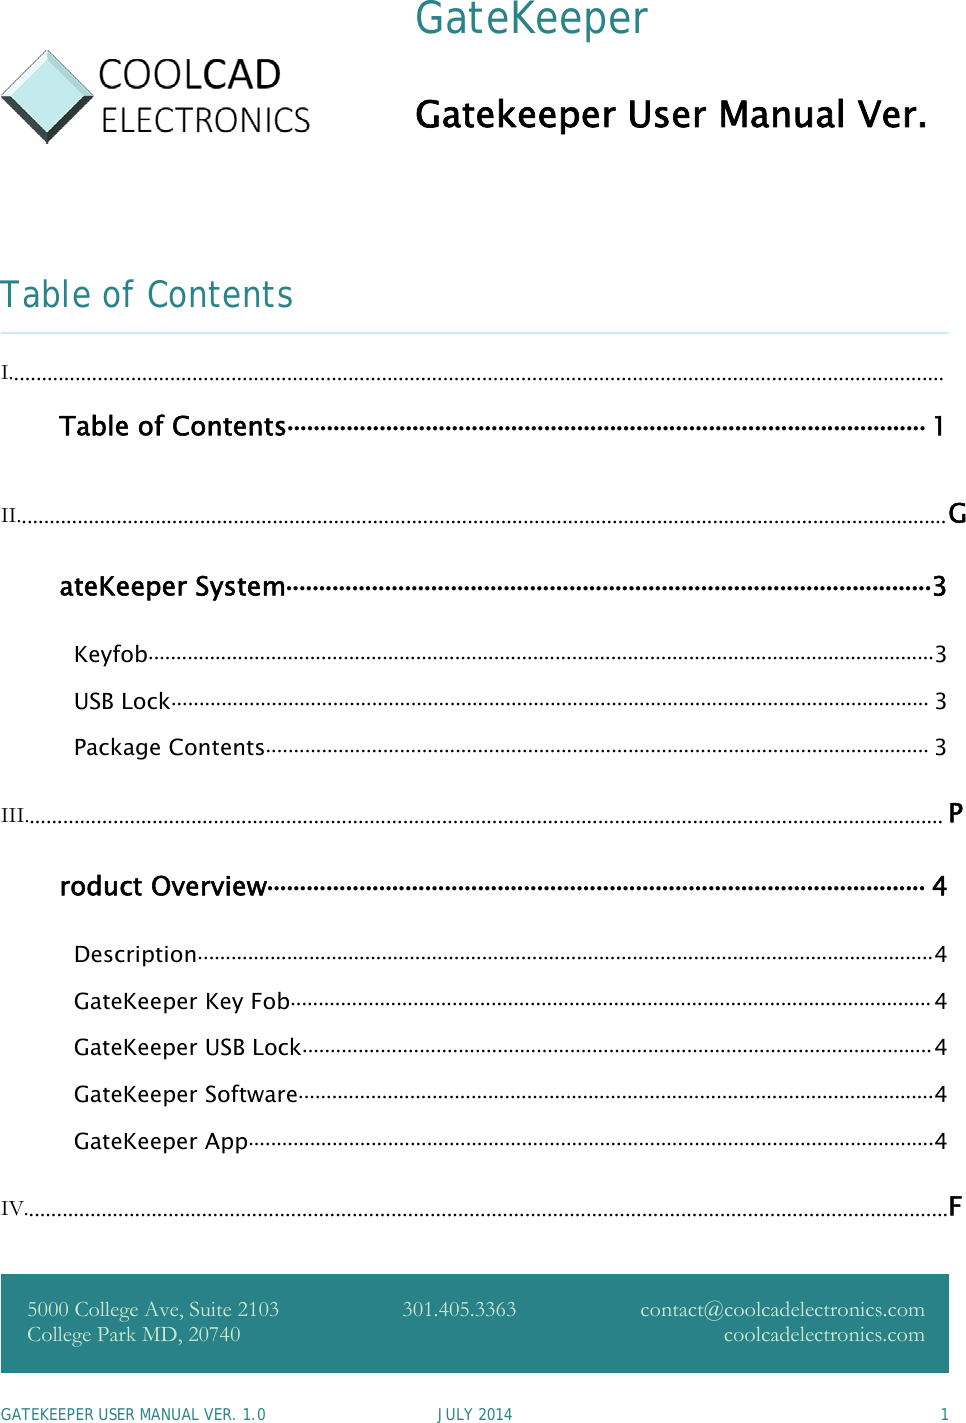 GATEKEEPER USER MANUAL VER. 1.0 JULY 2014 1GateKeeperGatekeeper User Manual Ver.Table of ContentsI........................................................................................................................................................................Table of Contents................................................................................................. 1II.......................................................................................................................................................................GateKeeper System..................................................................................................3Keyfob.............................................................................................................................................3USB Lock........................................................................................................................................ 3Package Contents....................................................................................................................... 3III..................................................................................................................................................................... Product Overview.................................................................................................... 4Description....................................................................................................................................4GateKeeper Key Fob...................................................................................................................4GateKeeper USB Lock.................................................................................................................4GateKeeper Software..................................................................................................................4GateKeeper App...........................................................................................................................4IV......................................................................................................................................................................F5000 College Ave, Suite 2103College Park MD, 20740301.405.3363 contact@coolcadelectronics.comcoolcadelectronics.com